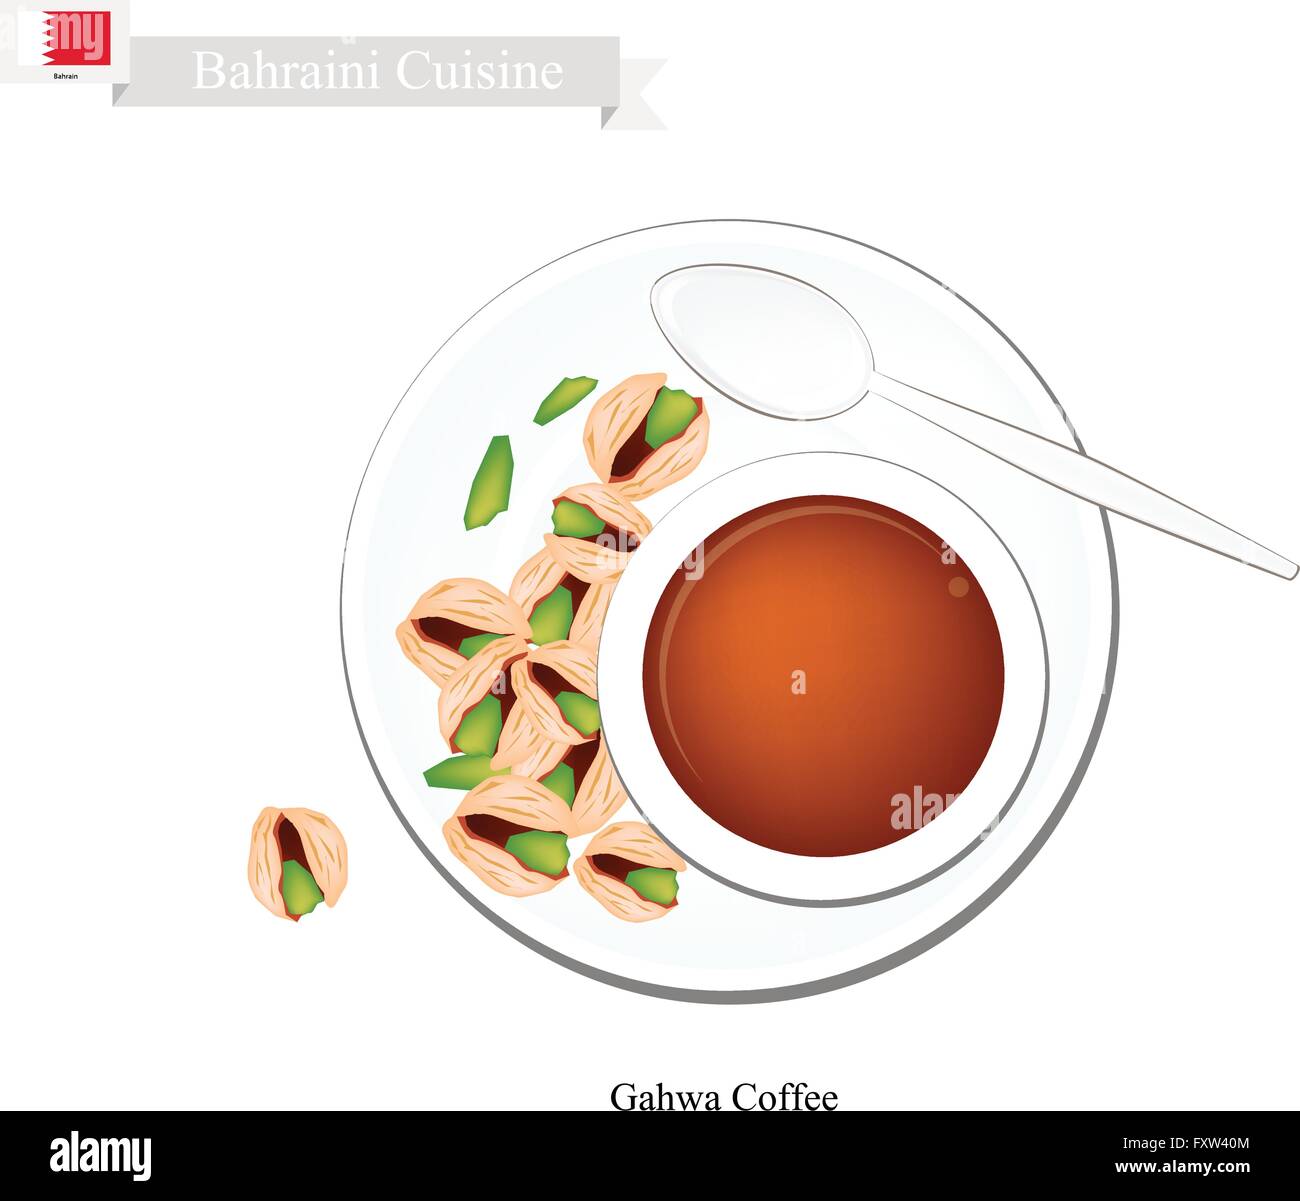 Bahraini Cuisine, Gahwa Coffee or Coffee Brewed from Dark Roast Coffee Beans Spiced with Cardamom. One of The Popular Beverage i Stock Vector